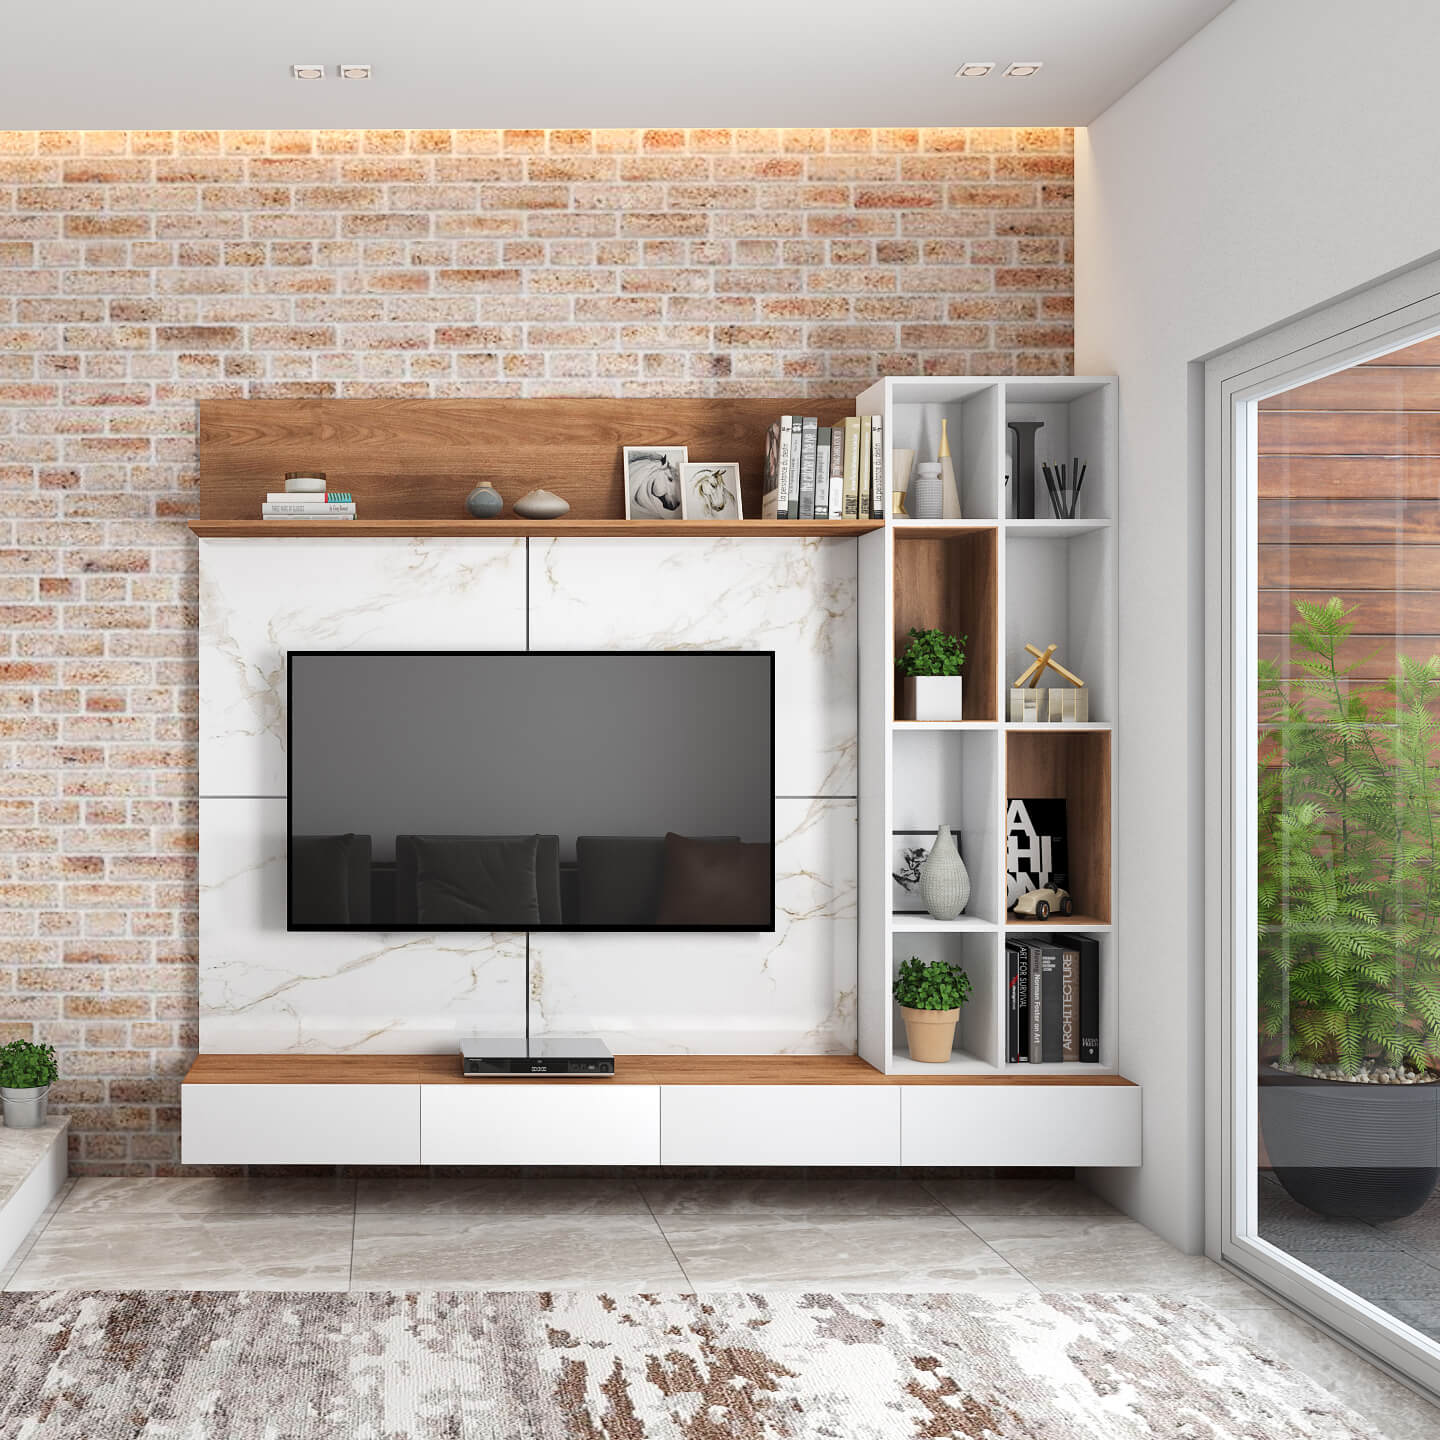 Affordable Pune interior designers crafted a living room with open-shelf TV unit